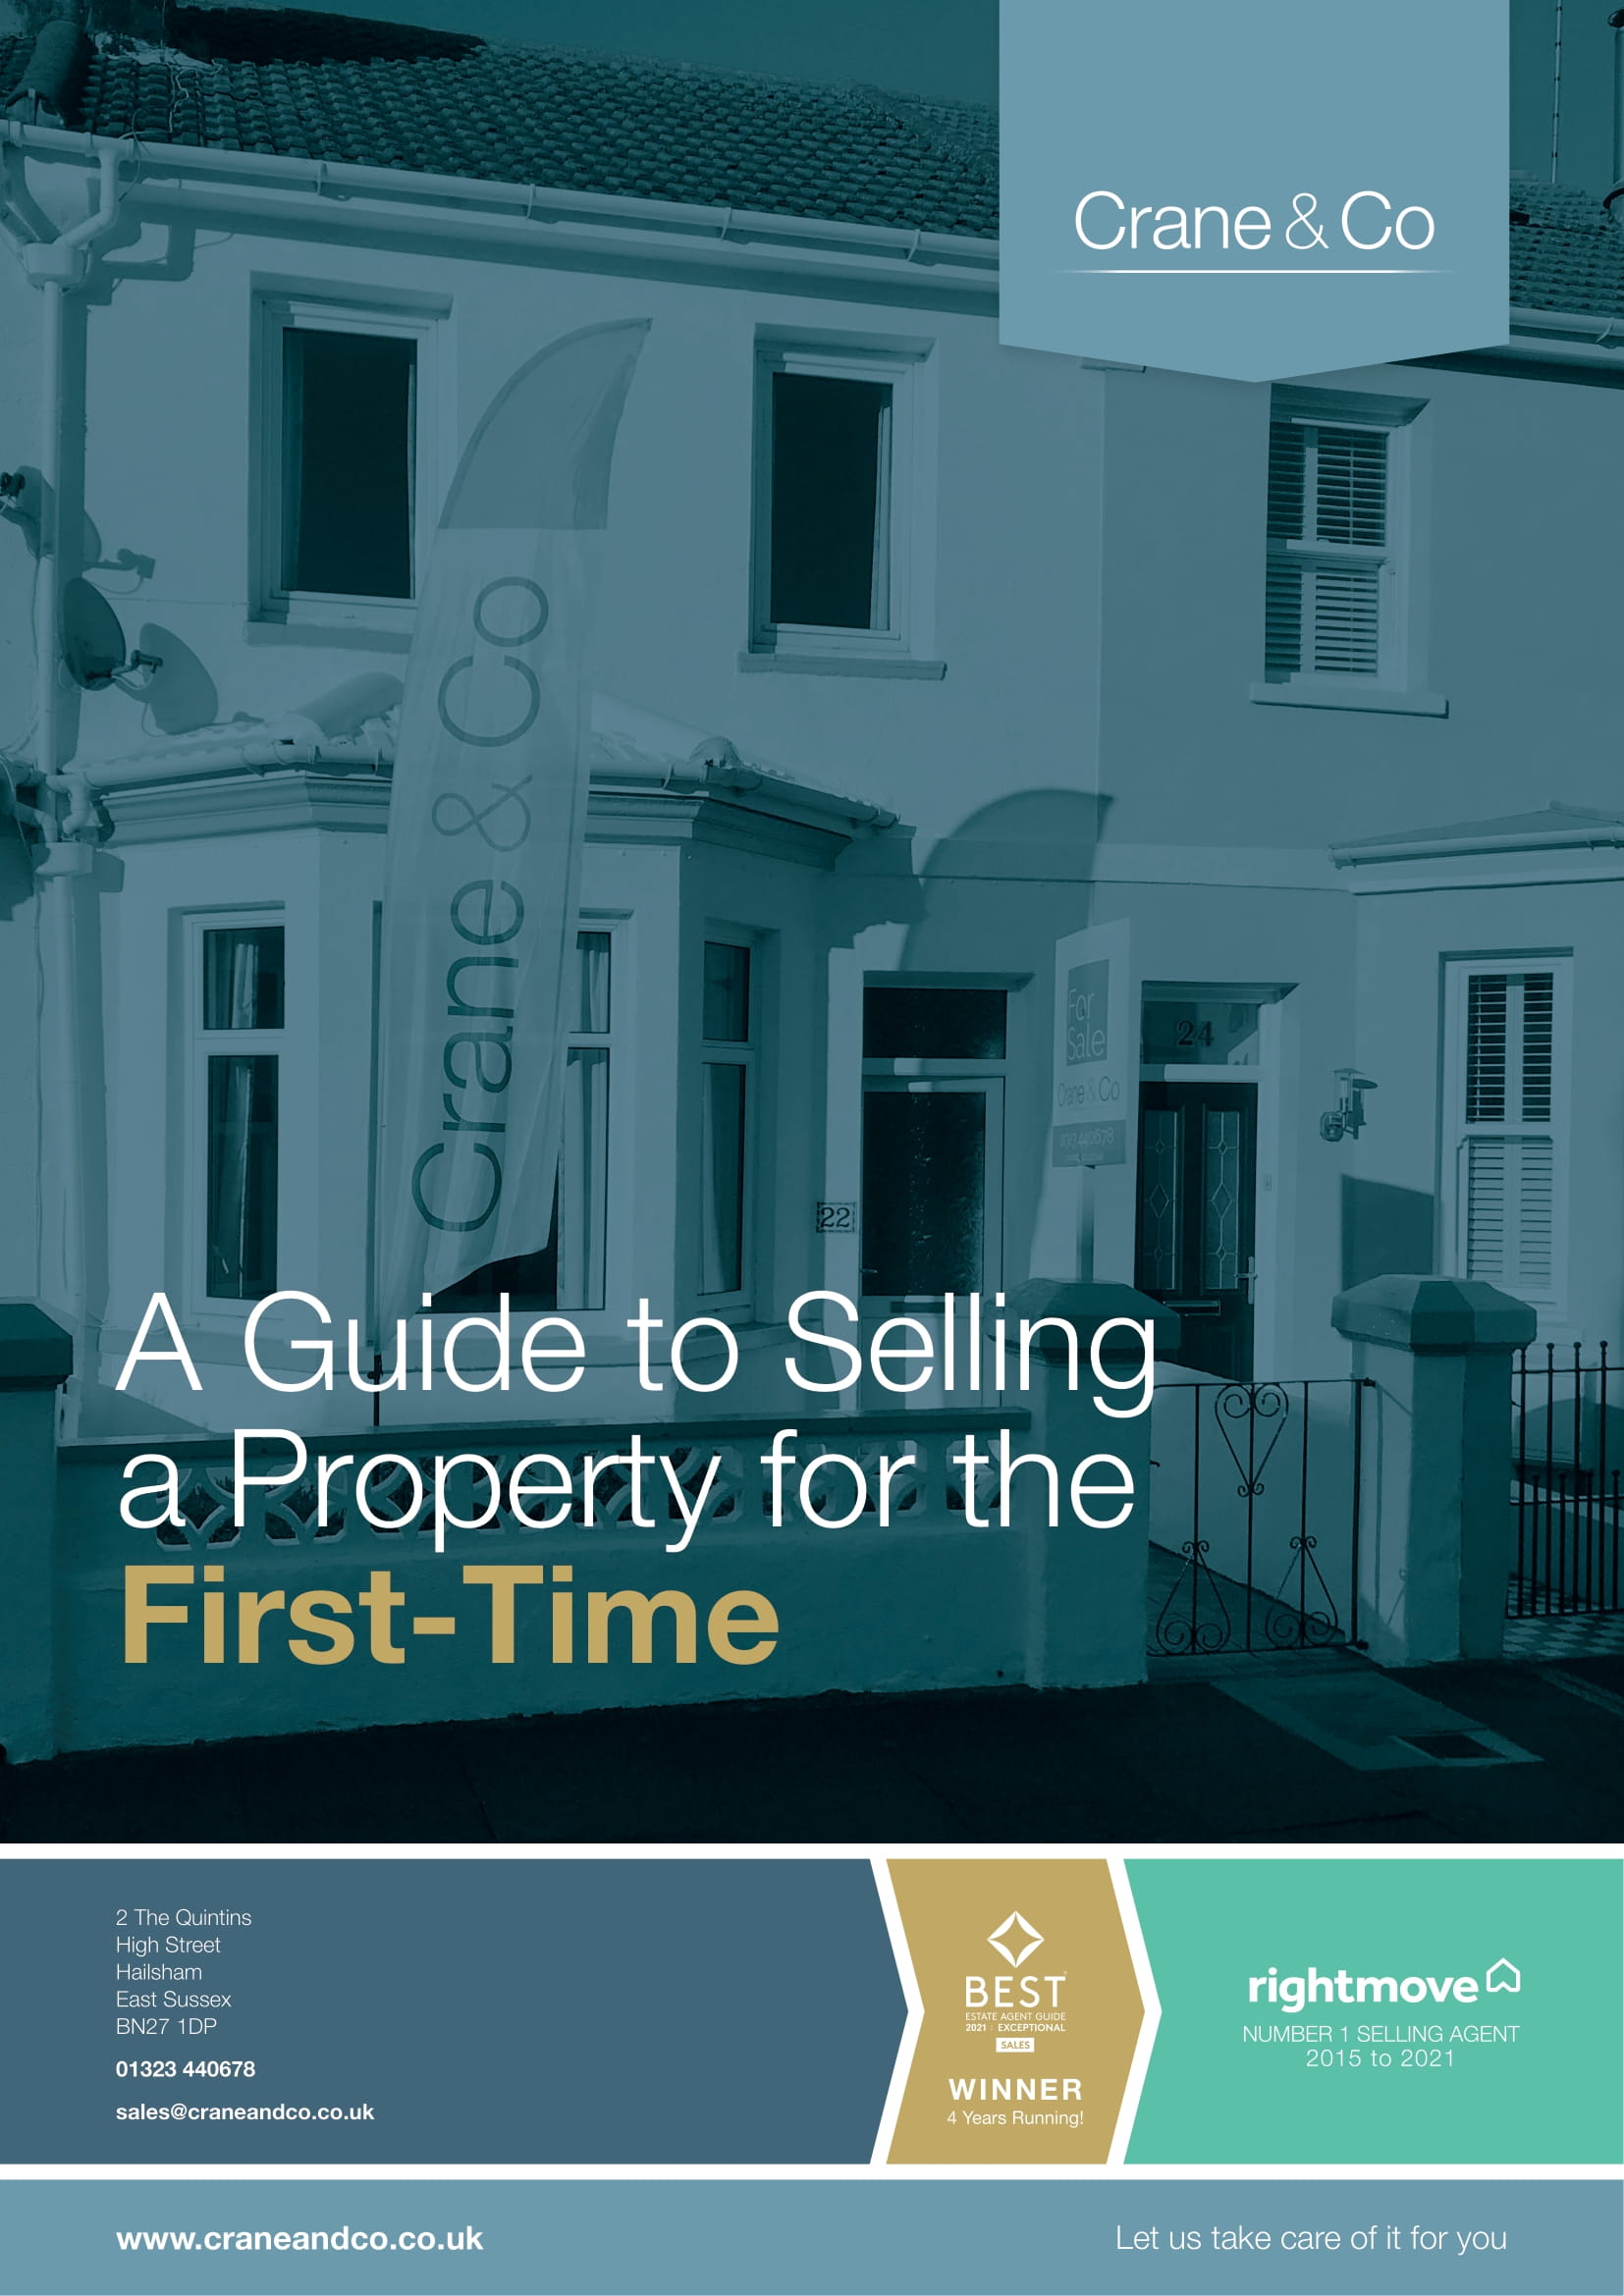 Crane & Co - A guide to selling your property for the first time-1